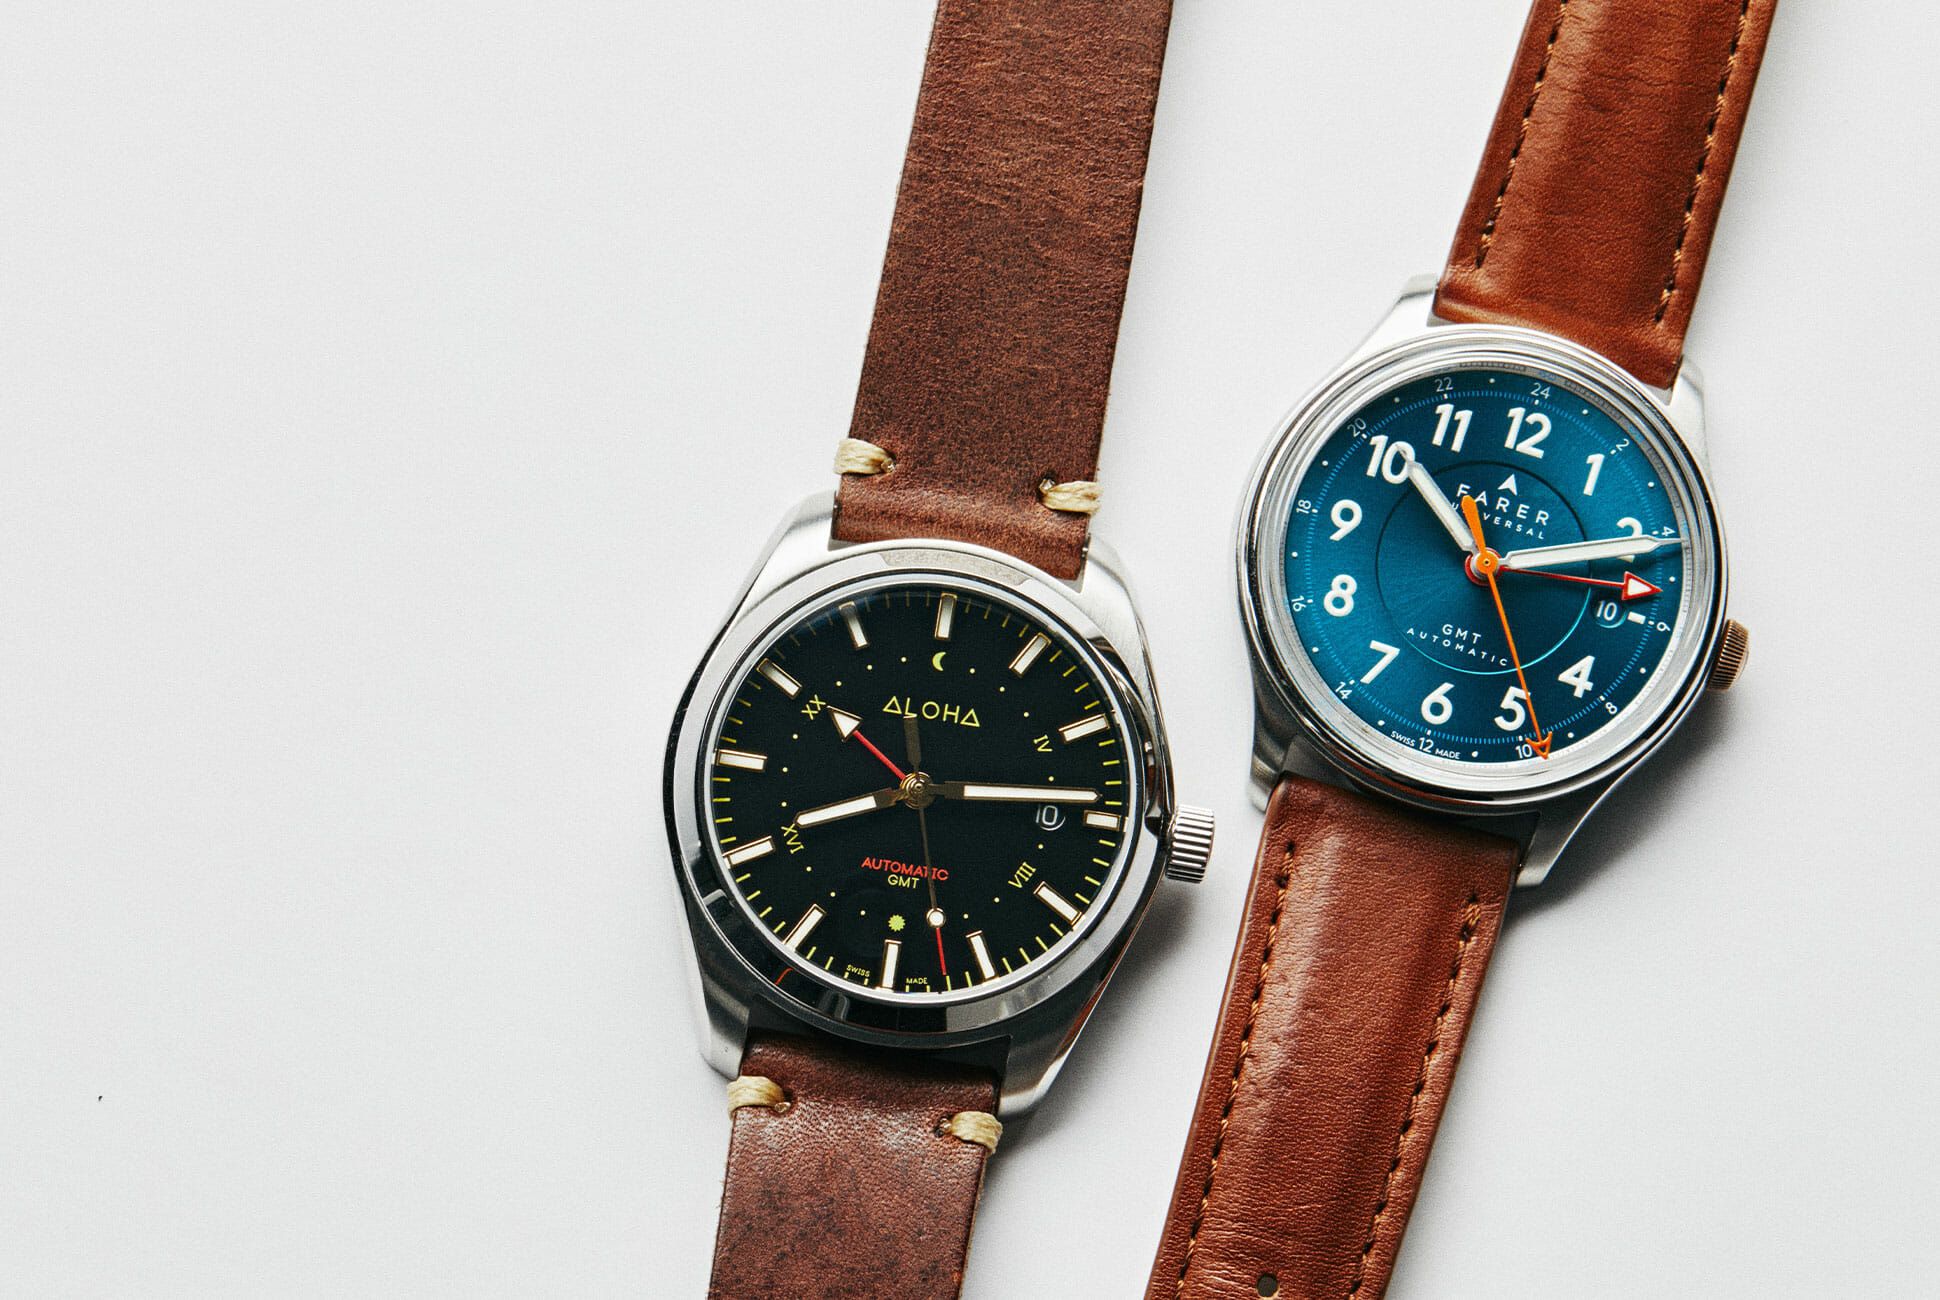 iets Sluit een verzekering af restaurant These Two Automatic GMT Watches Are Both Available for Under $1,500